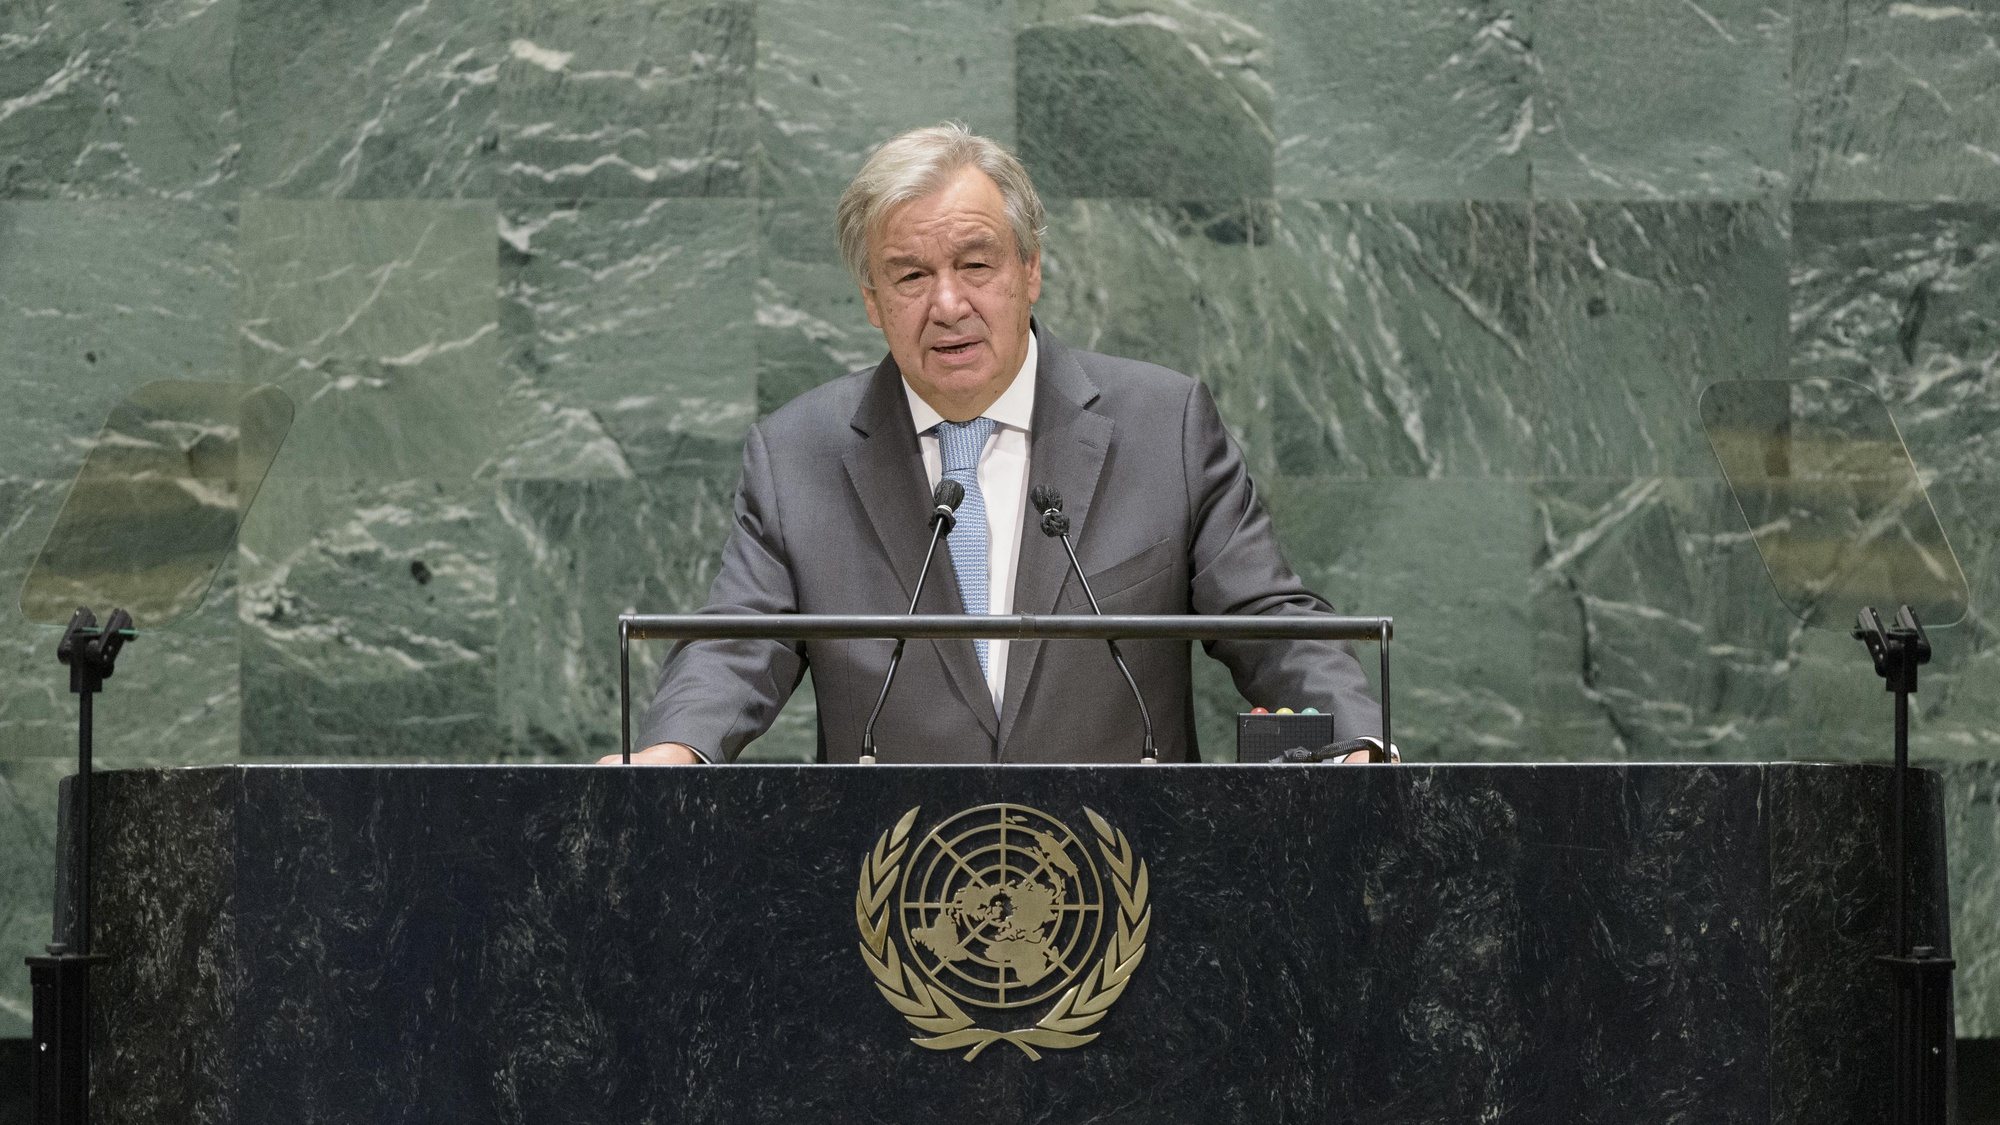 epa08686935 A handout photo made available by UN photo shows Secretary-General of the United Nations, Antonio Guterres, speaking during the 75th General Assembly of the United Nations, in New York, New York, USA, 21 September 2020. Due to the COVID-19 coronavirus pandemic, the 75th General Assembly of the United Nations meetings are held mostly virutal.  EPA/Manuel Elias / UN Photo / HANDOUT  HANDOUT EDITORIAL USE ONLY/NO SALES